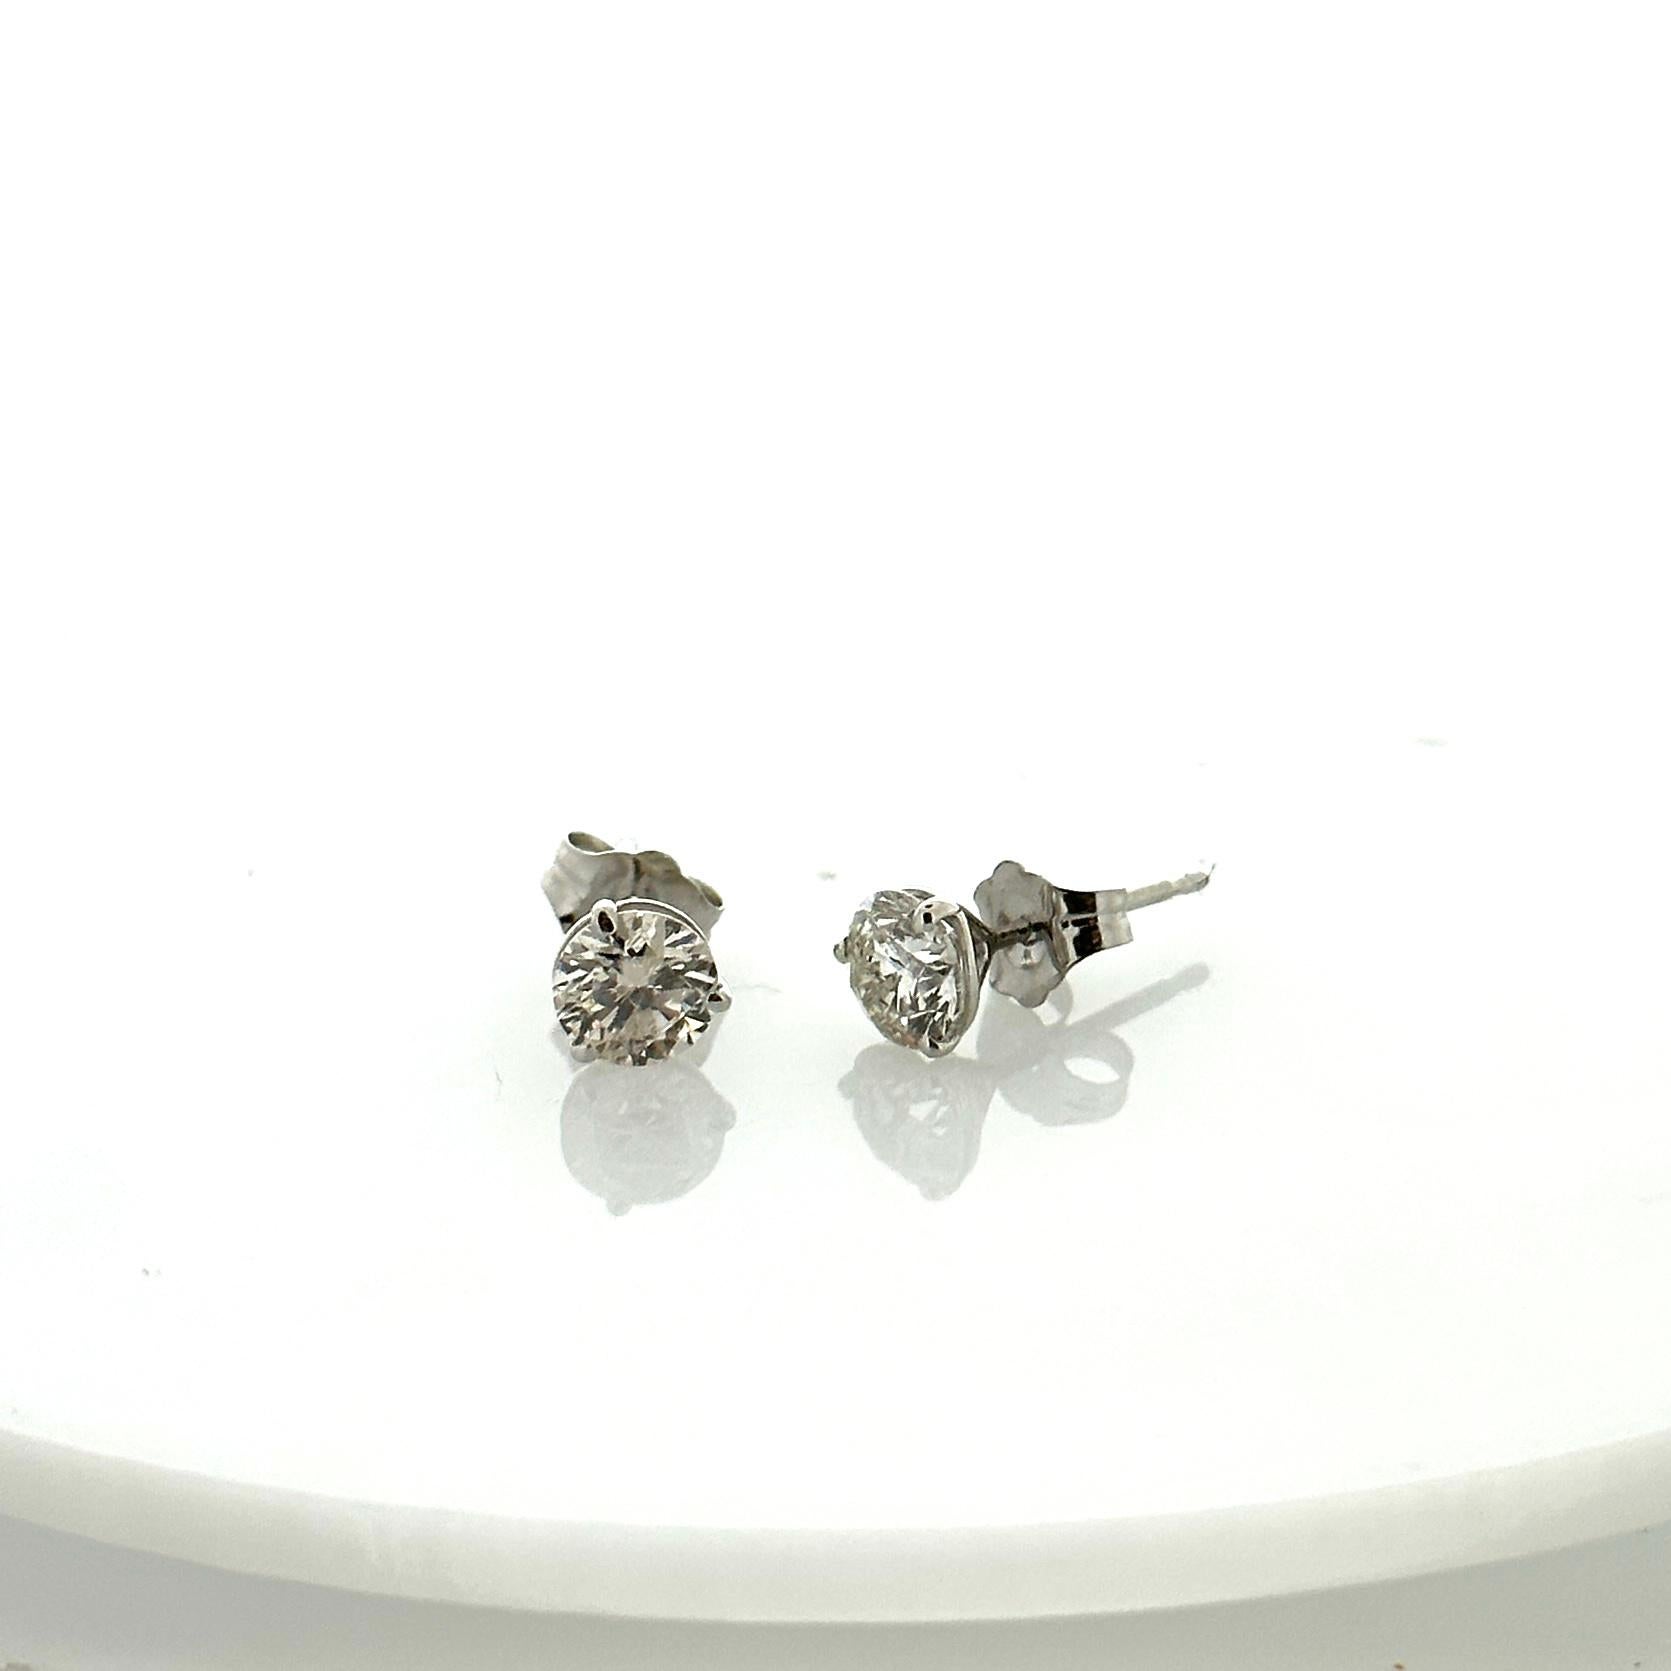 Stunning 14 Karat white gold handmade earrings featuring 2 round brilliant cut diamonds weighing 1.00 carat total I-J color and SI1 clarity. These gorgeous earrings are classic and timelessly elegant.